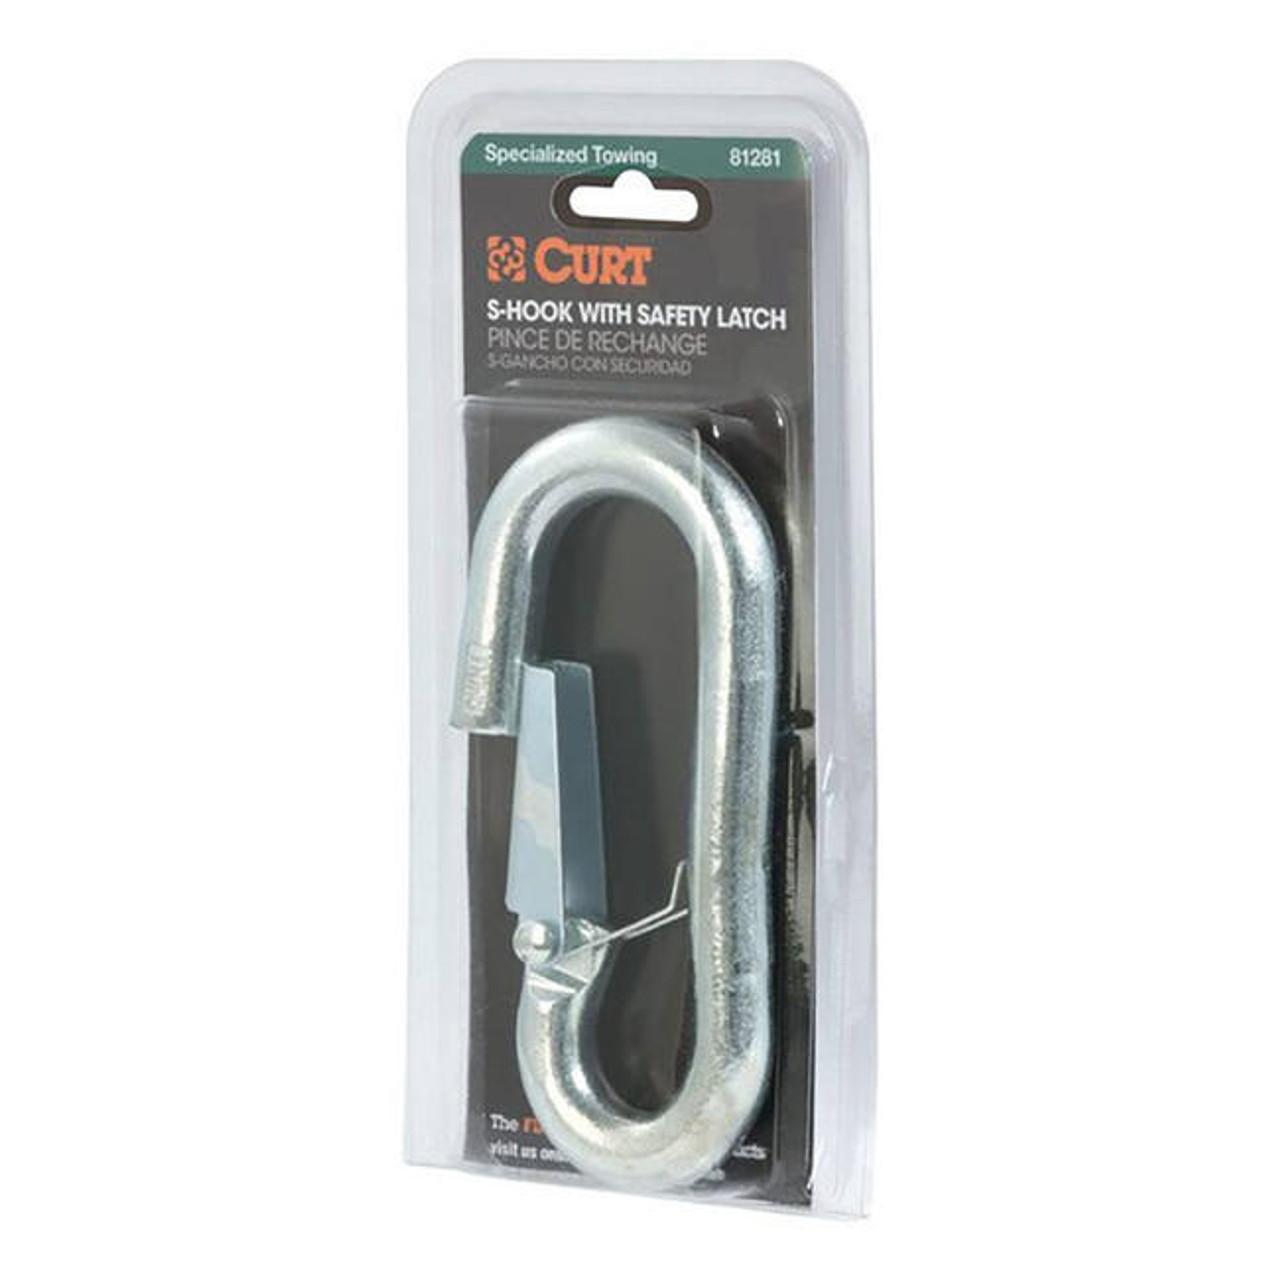 https://cdn11.bigcommerce.com/s-ohy7i05/images/stencil/1280x1280/products/1015/25710/curt-class-iii-s-hook-wsafety-latch-packaged-zinc-finish-5000-gross-trailer-weight-916-in-dia__12978.1688590964.jpg?c=3?imbypass=on